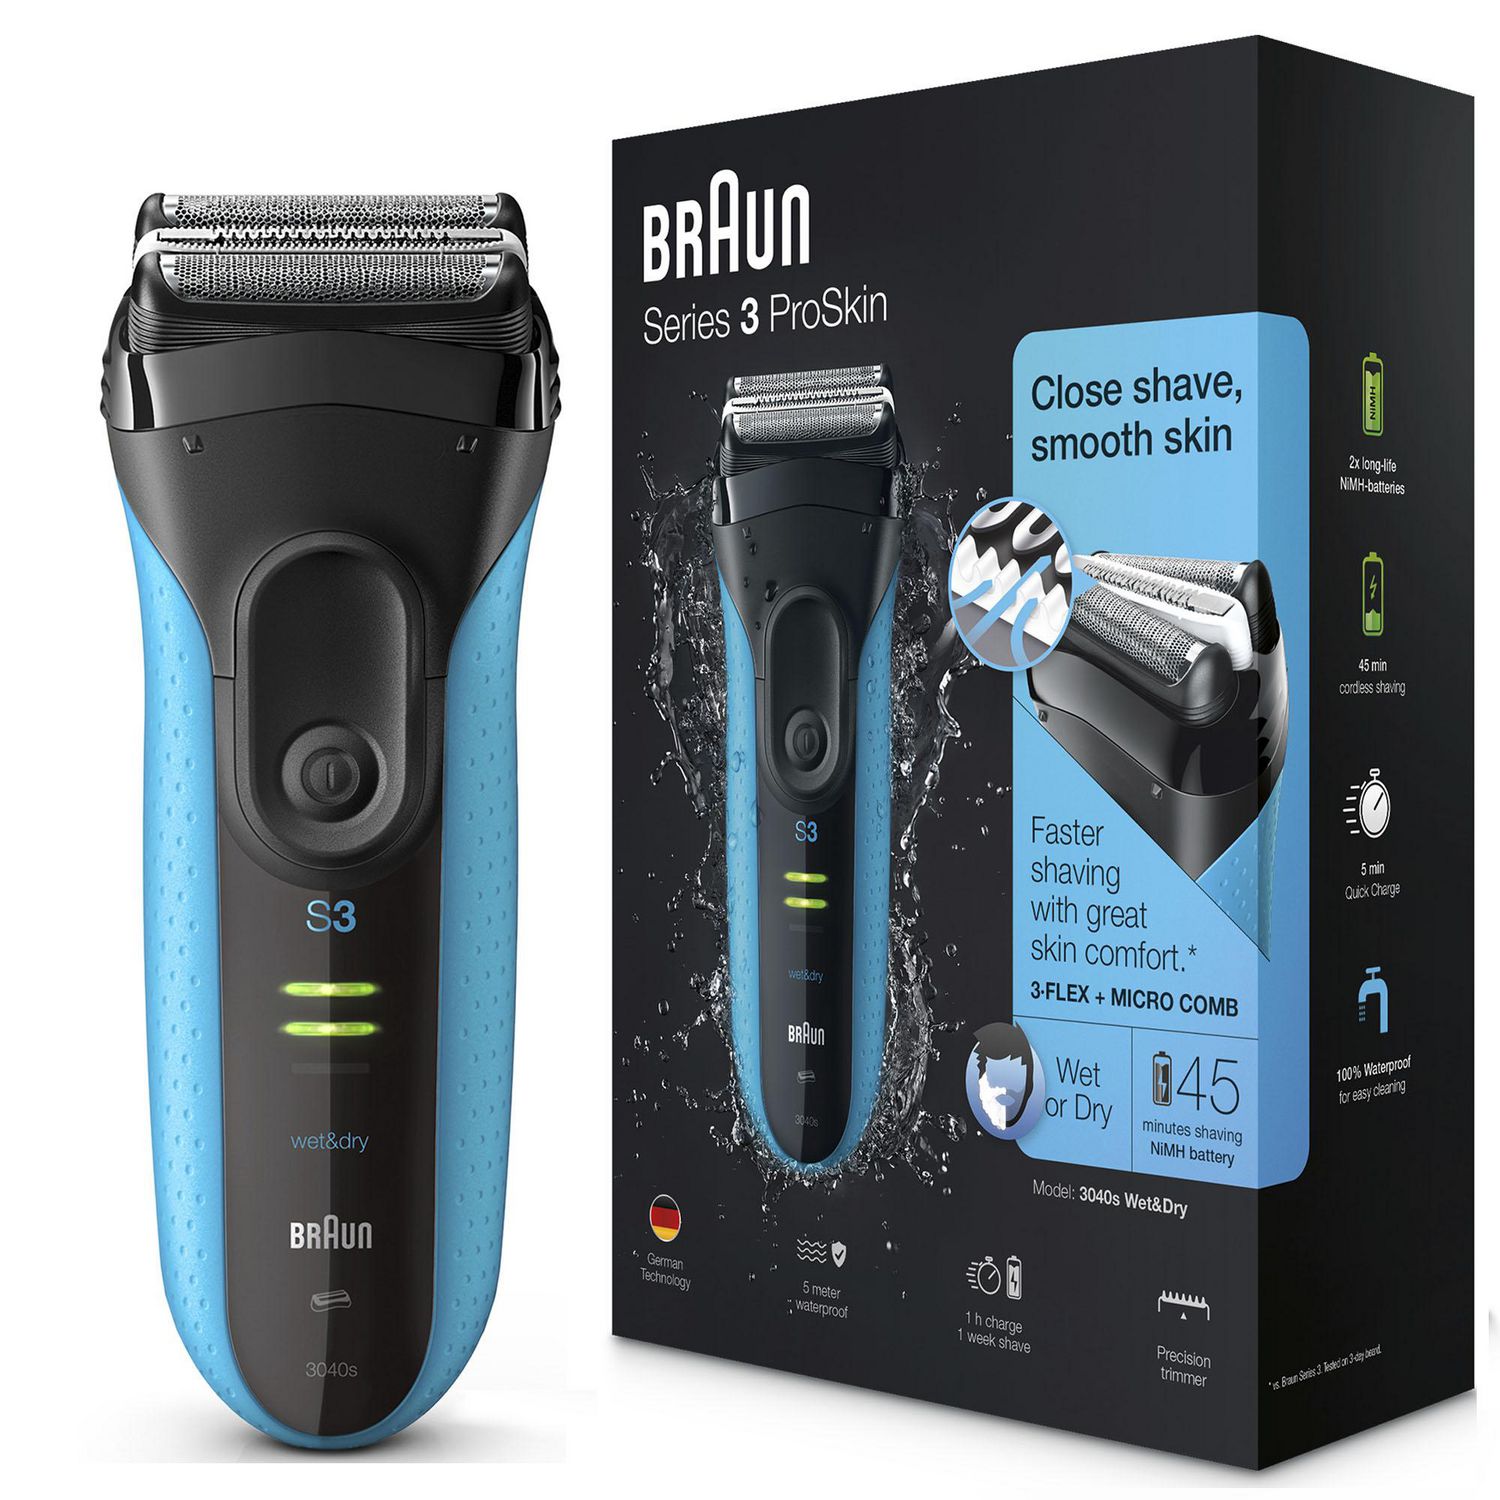 Shave&Style and Series 1 Dry Men, Wet Razor Shaver, 3-in-1 3 Electric Braun Black/Blue, Set for Proskin